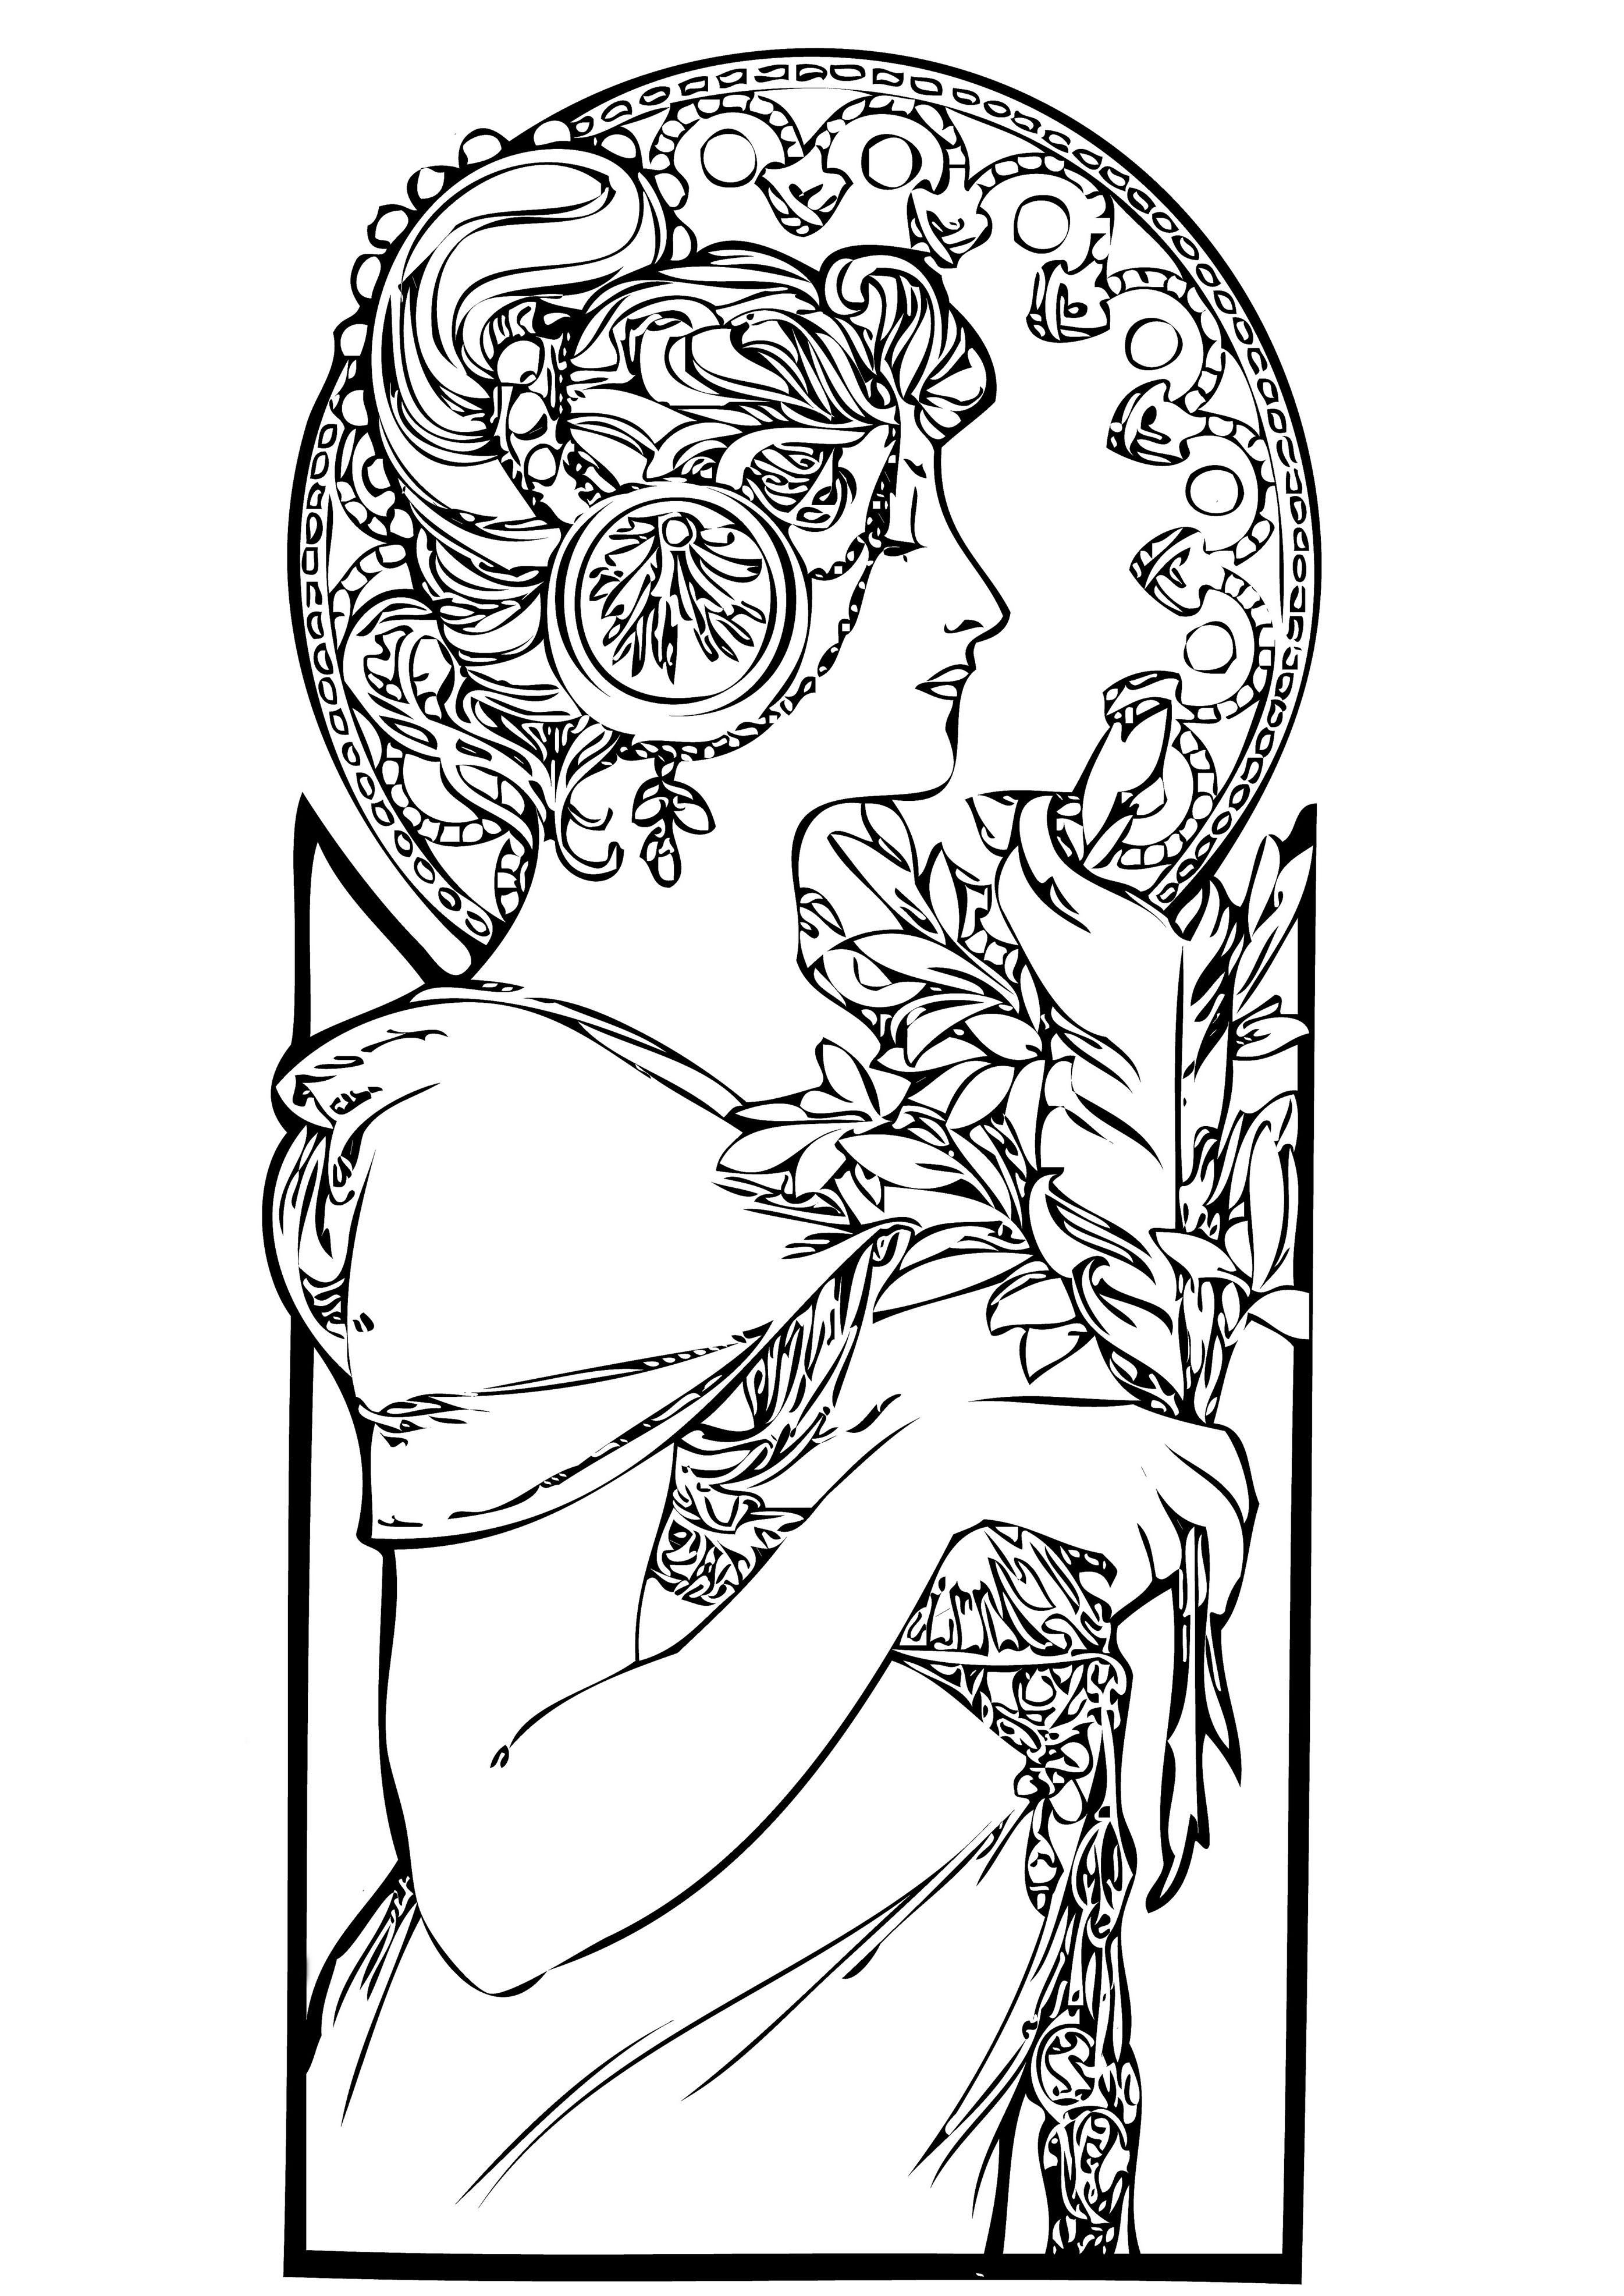 A beautiful woman drawn with Art Nouveau style, with an elegant woman in profile